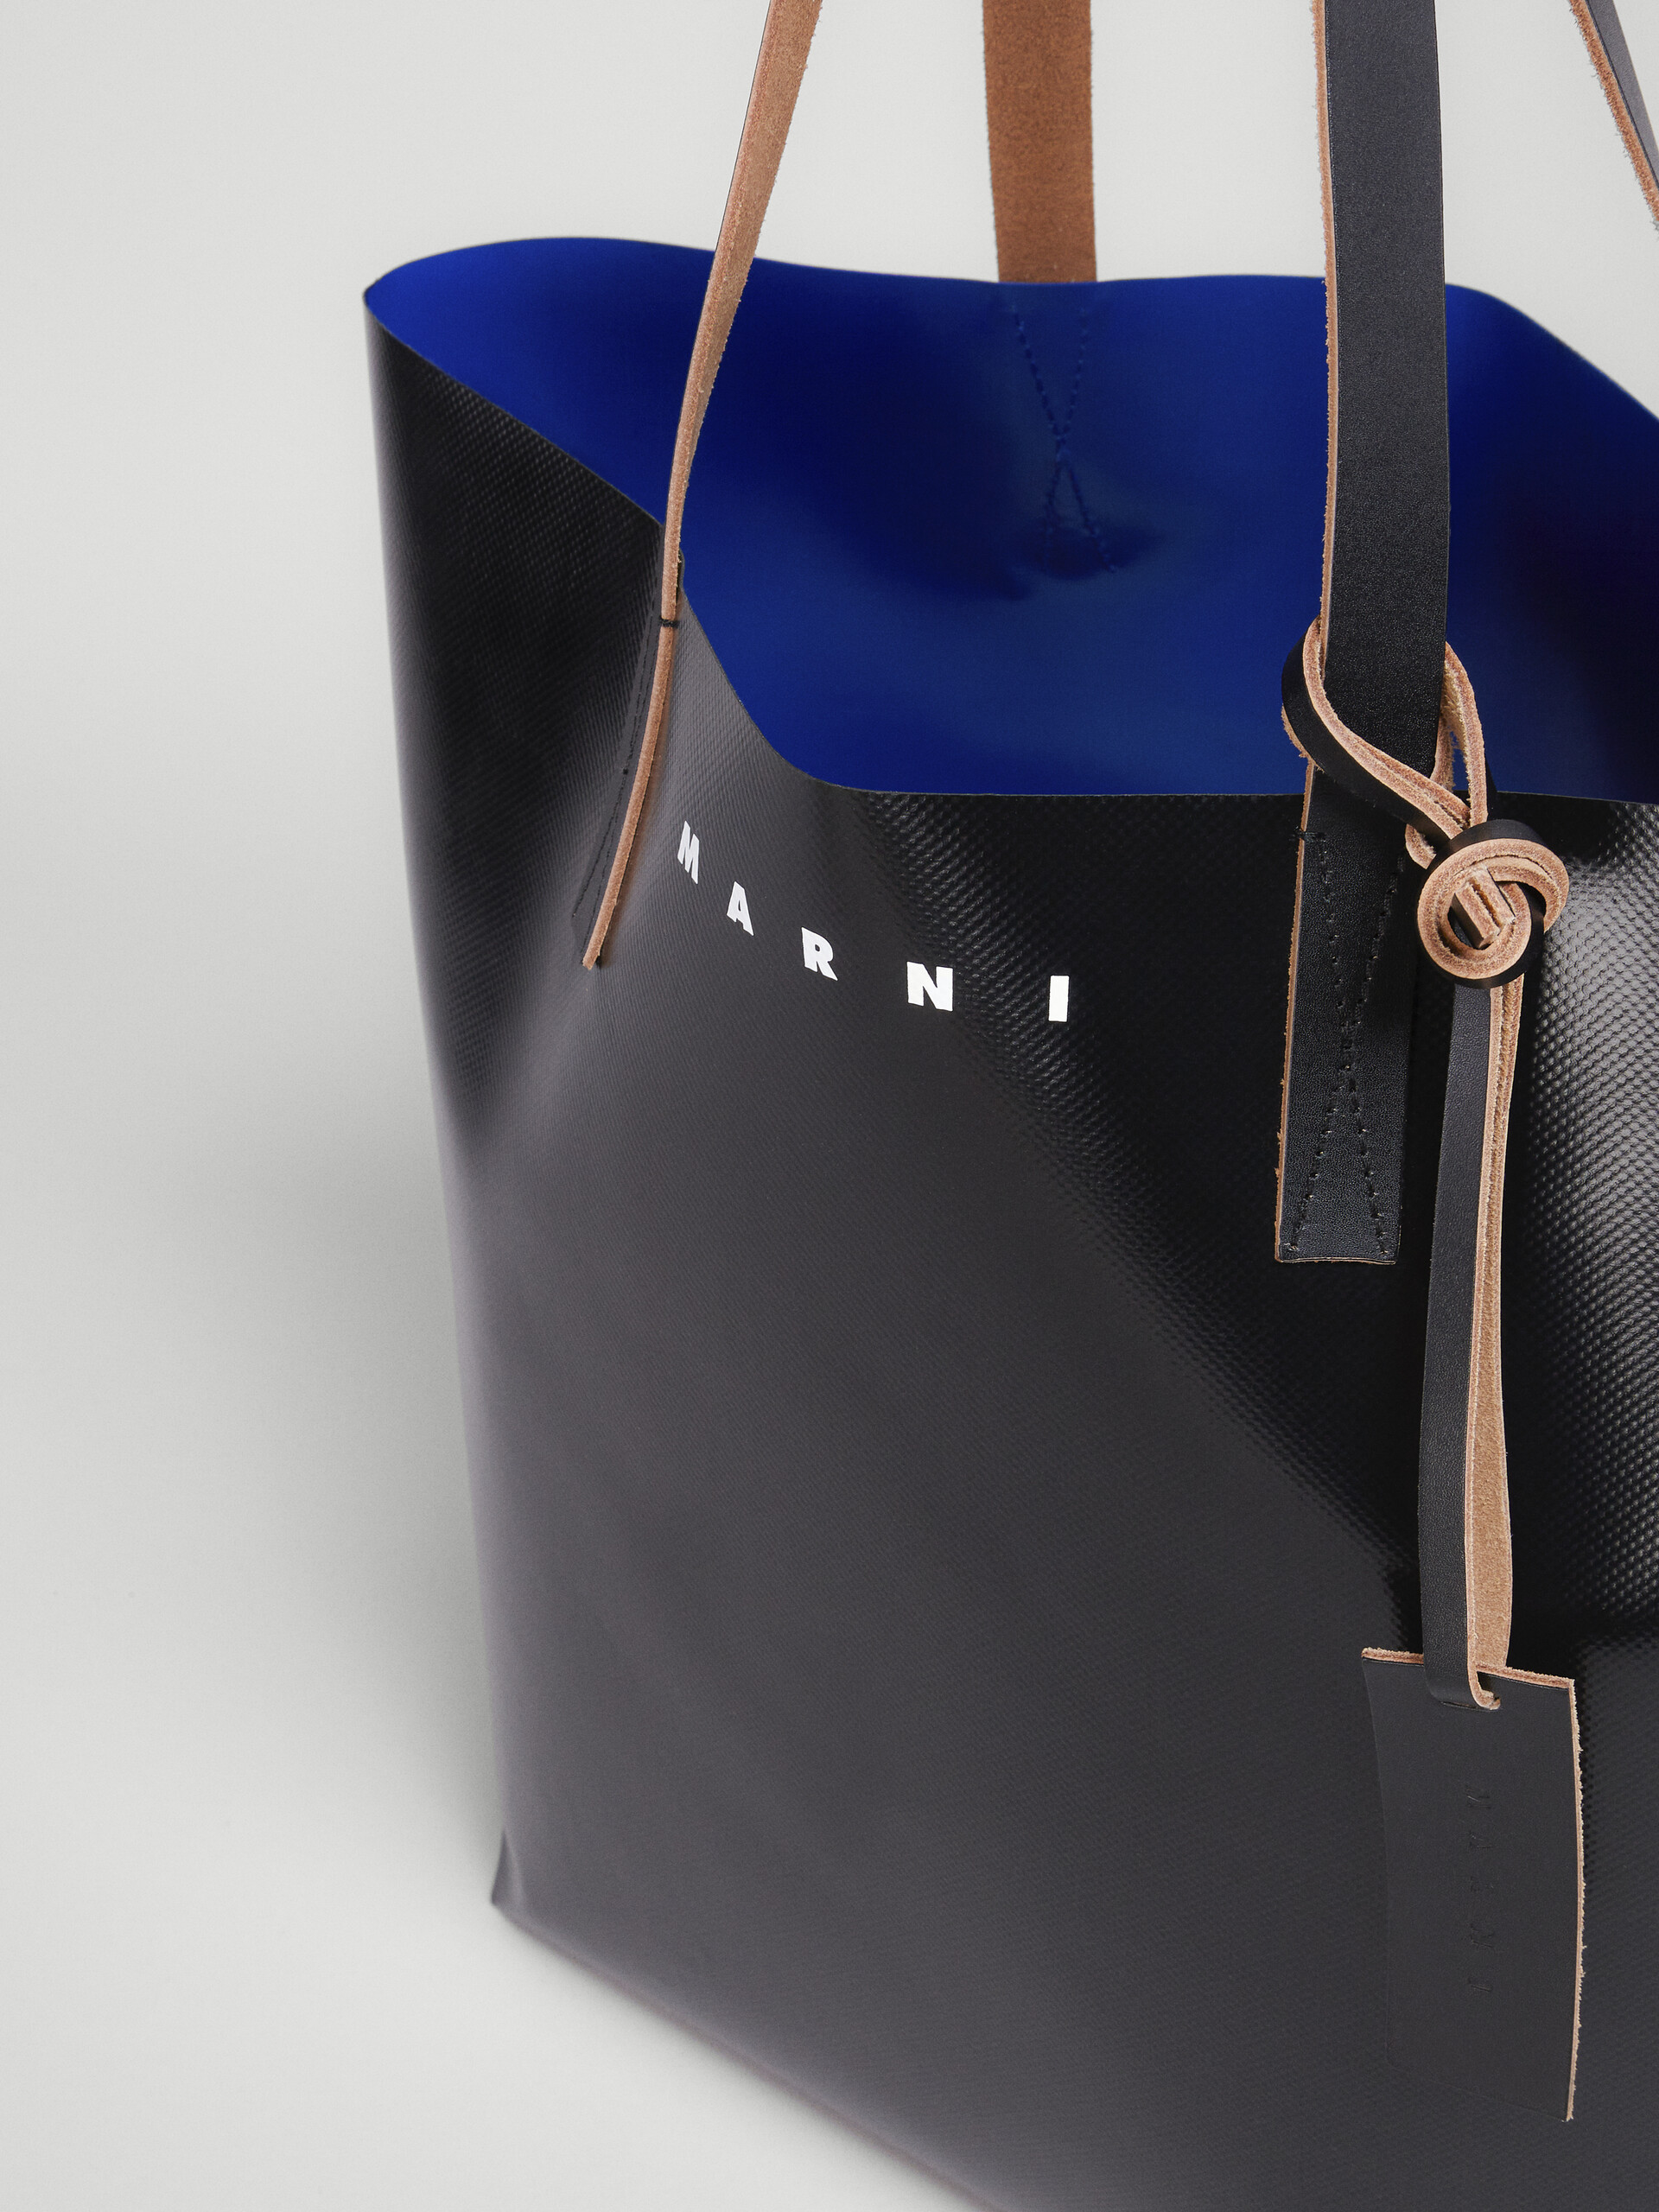 Black and blue TRIBECA shopping bag - Shopping Bags - Image 5